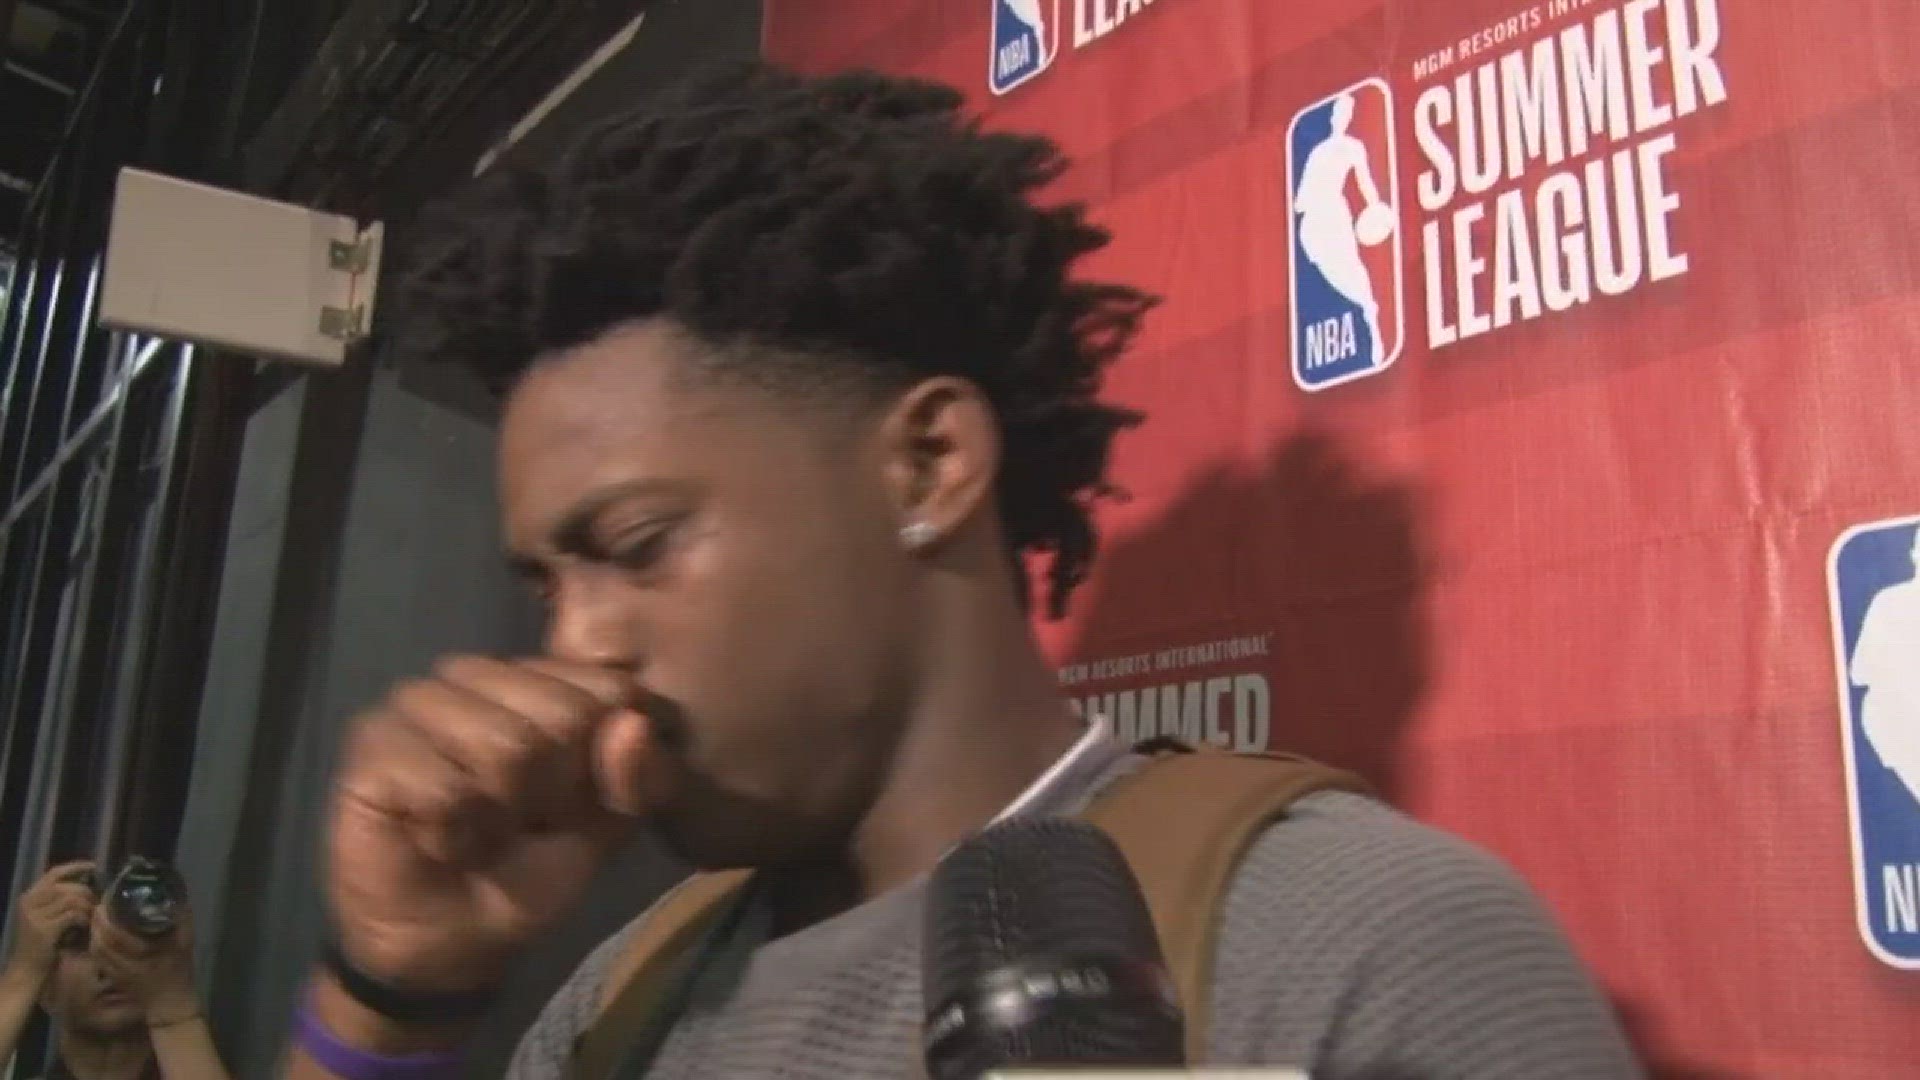 Sacramento Kings top draft pick De'Aaron Fox talks about his debut in the NBA Summer League and his performance against the Phoenix Suns.